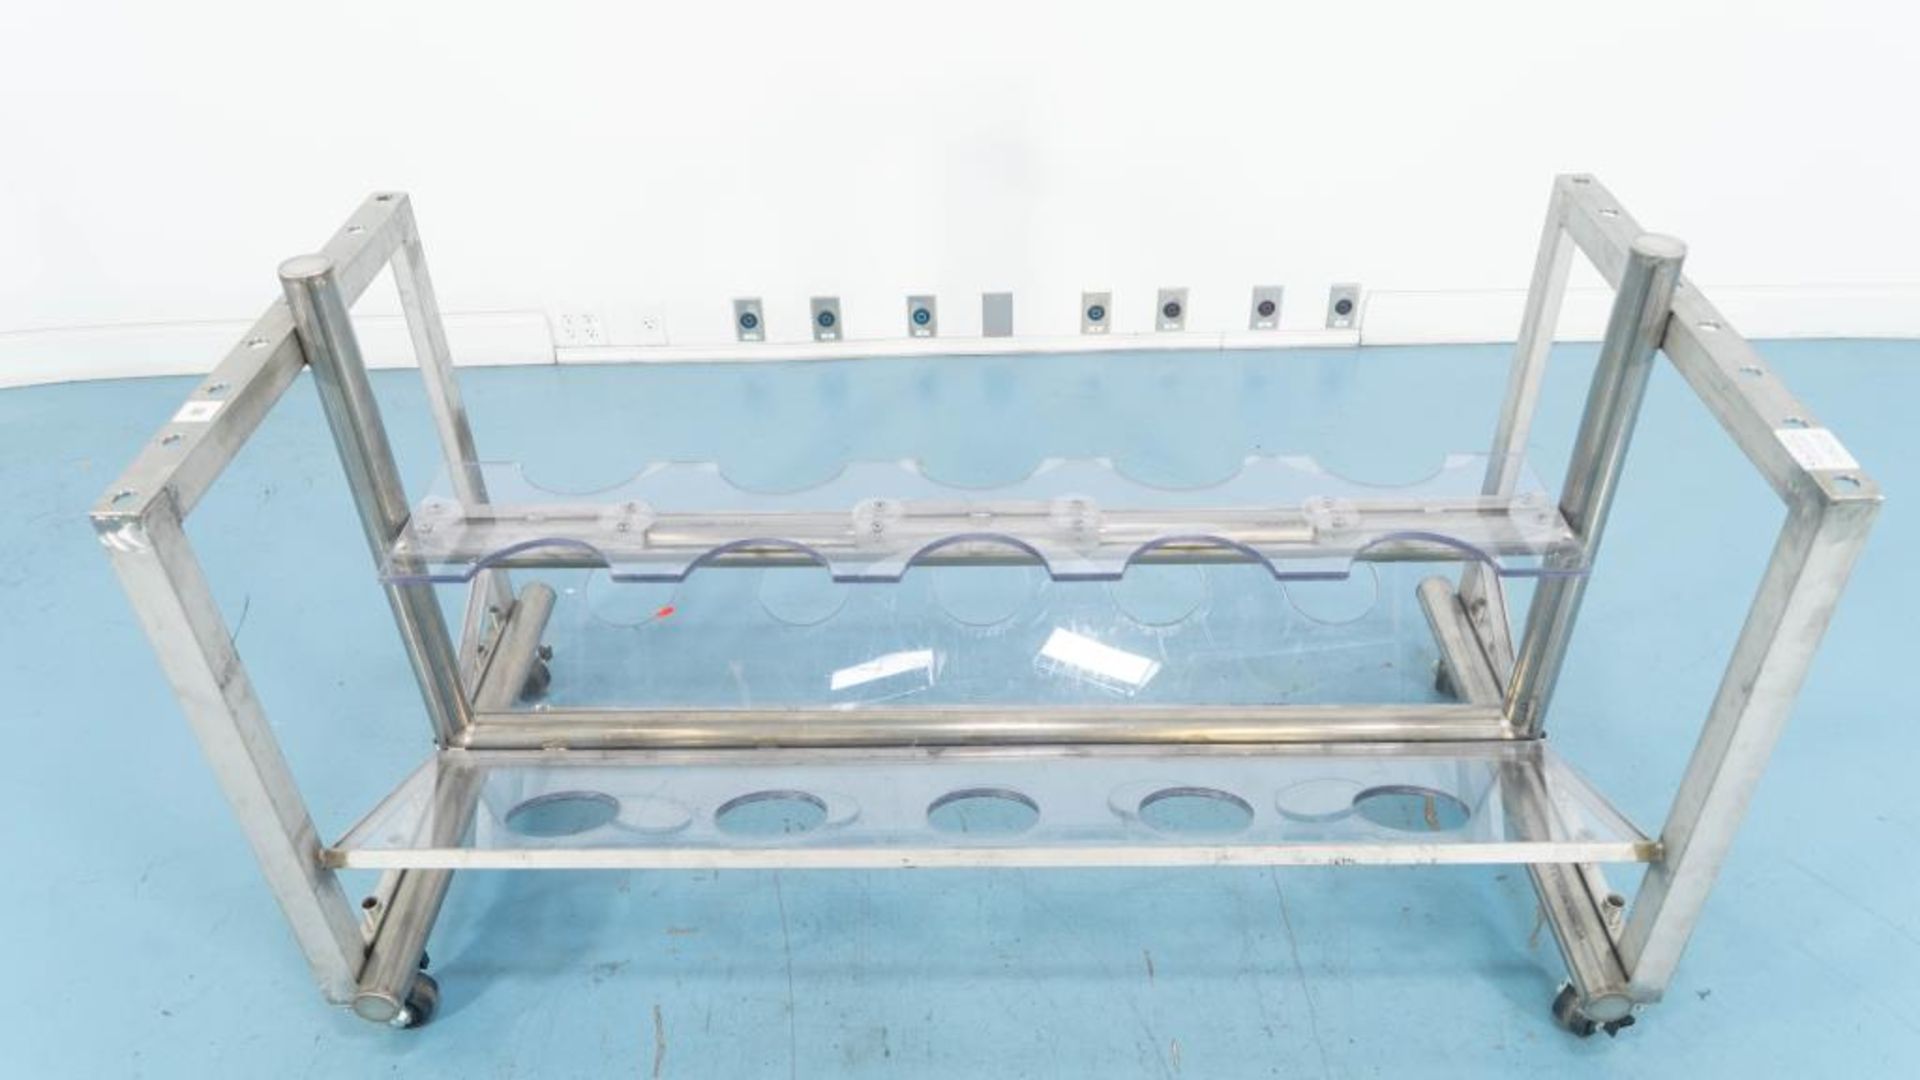 Steel Rack for Motor Storage and Transport - Image 4 of 6